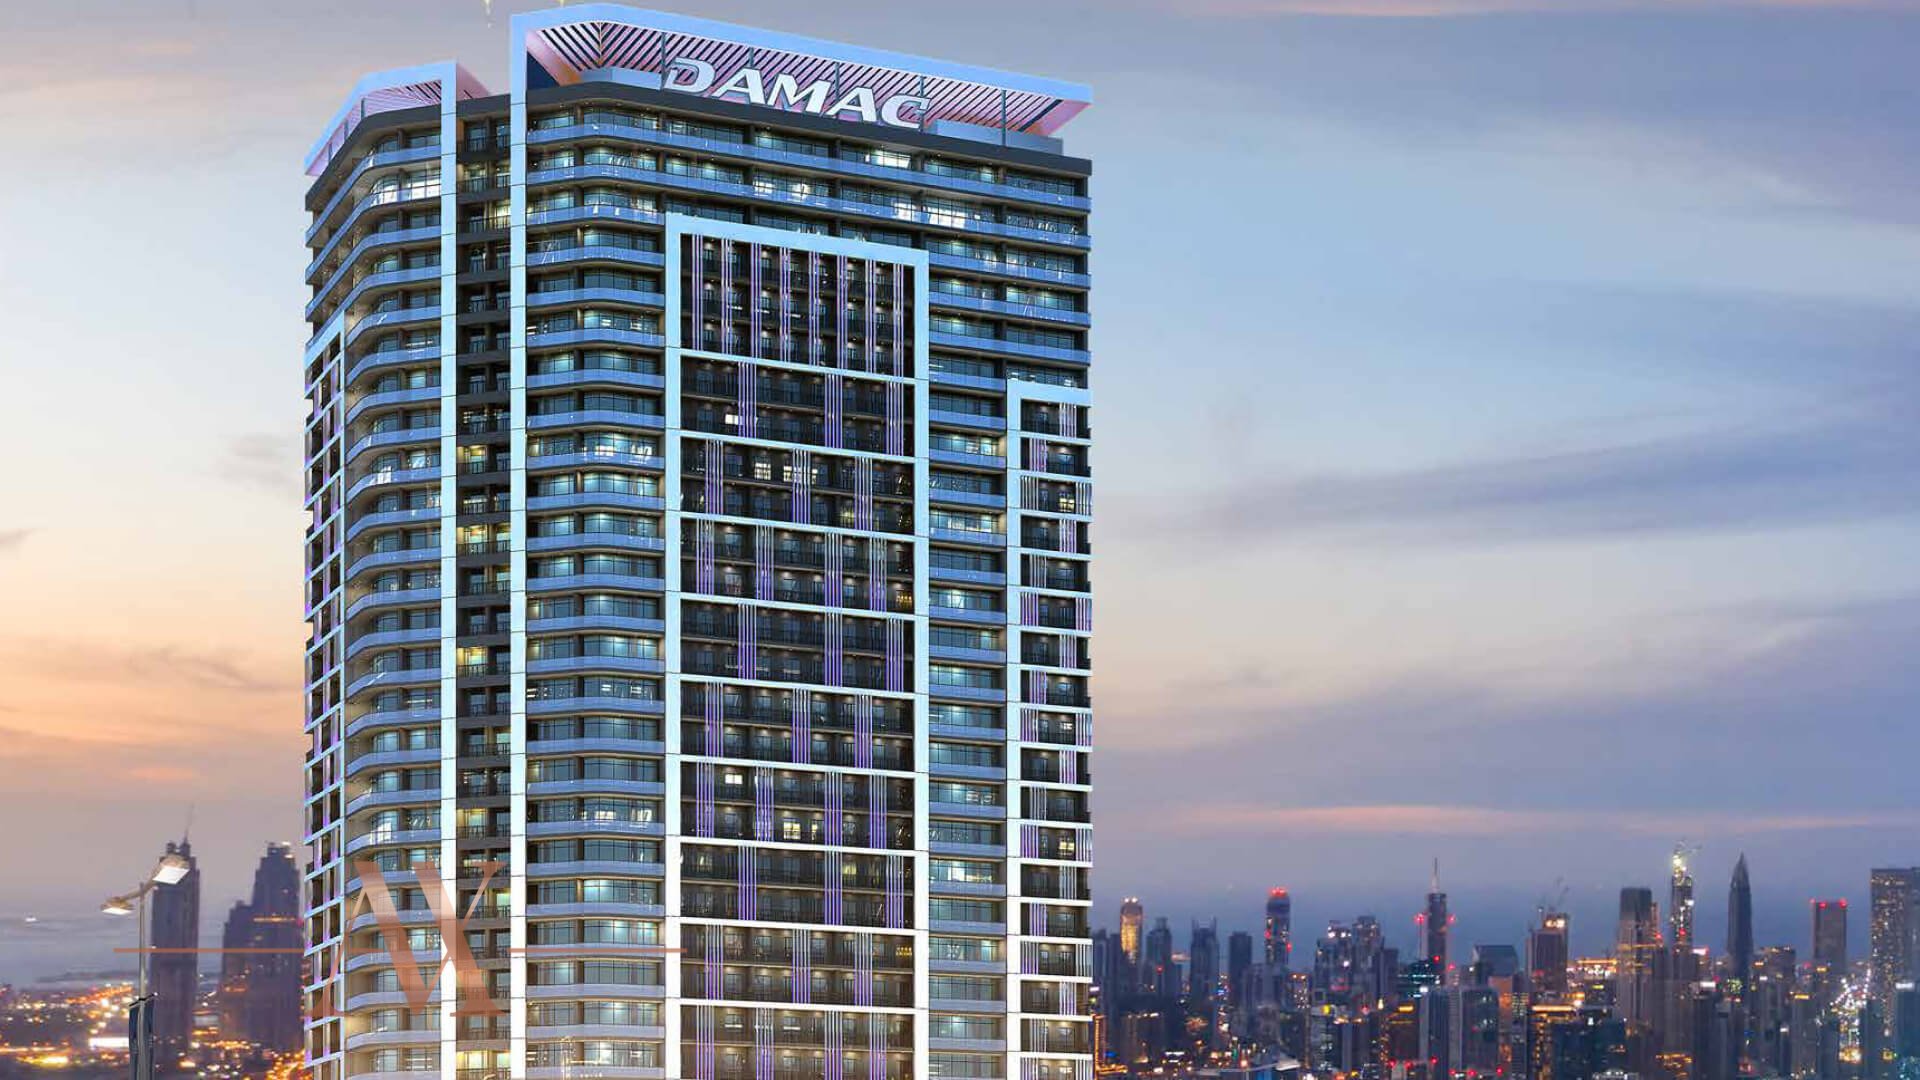 ZADA TOWER property for sale with Bitcoin & Cryptocurrency - 1